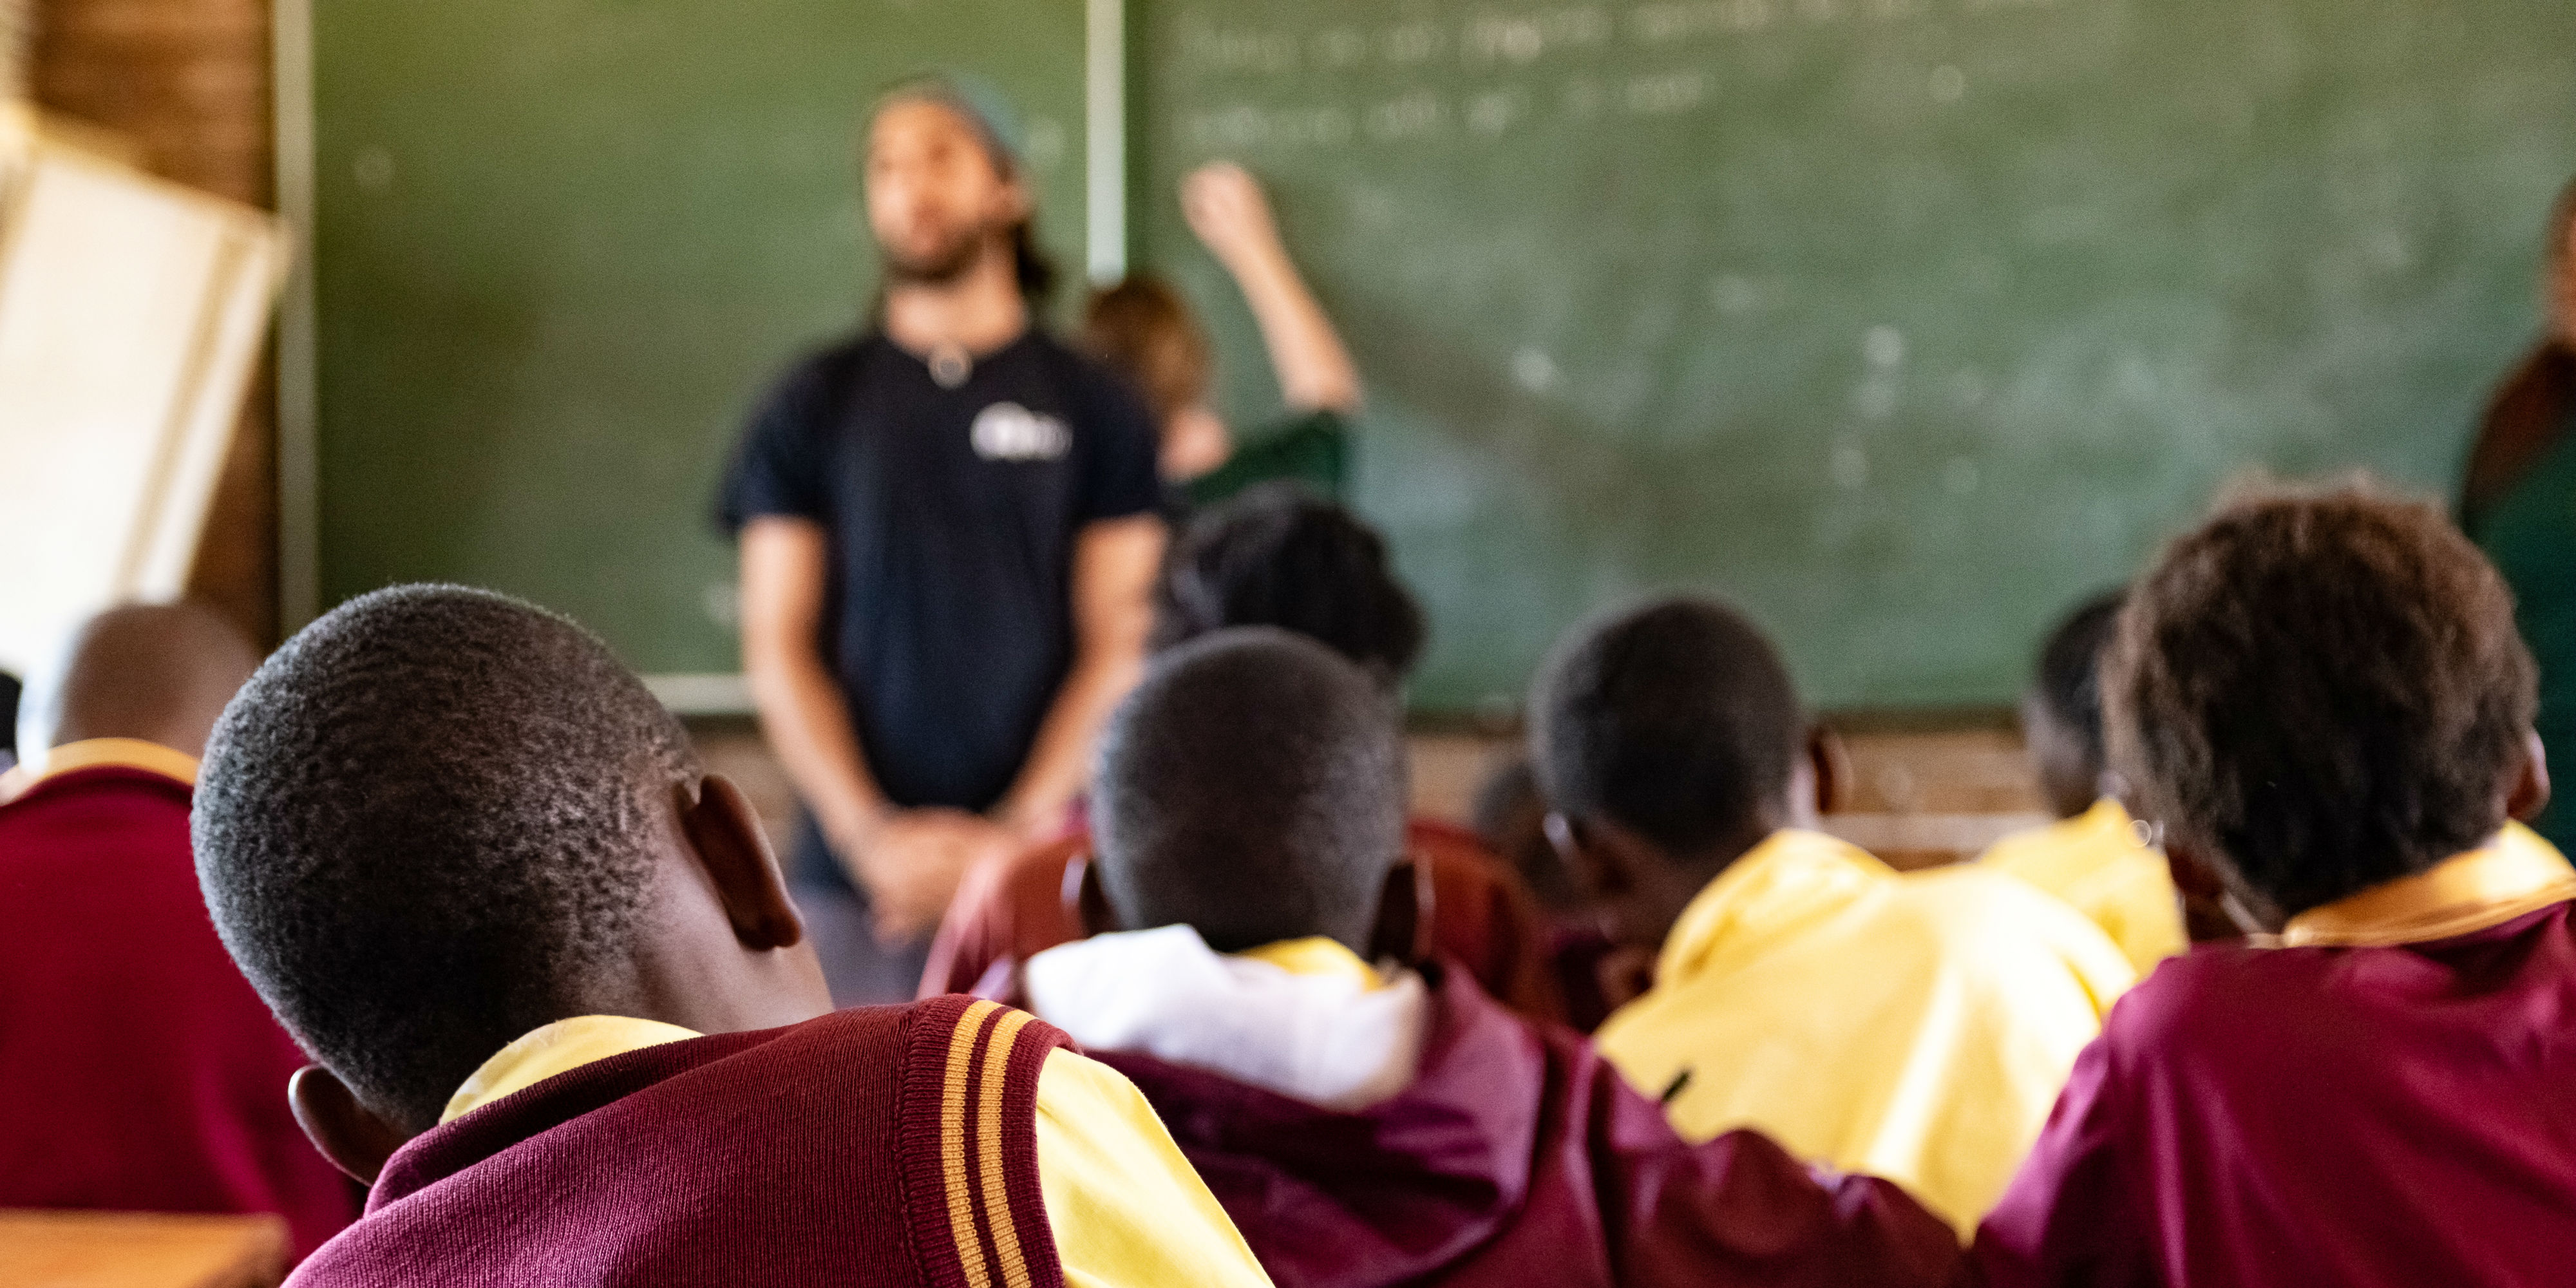 Teach English abroad interns lead a lesson in a school in Limpopo, South Africa.